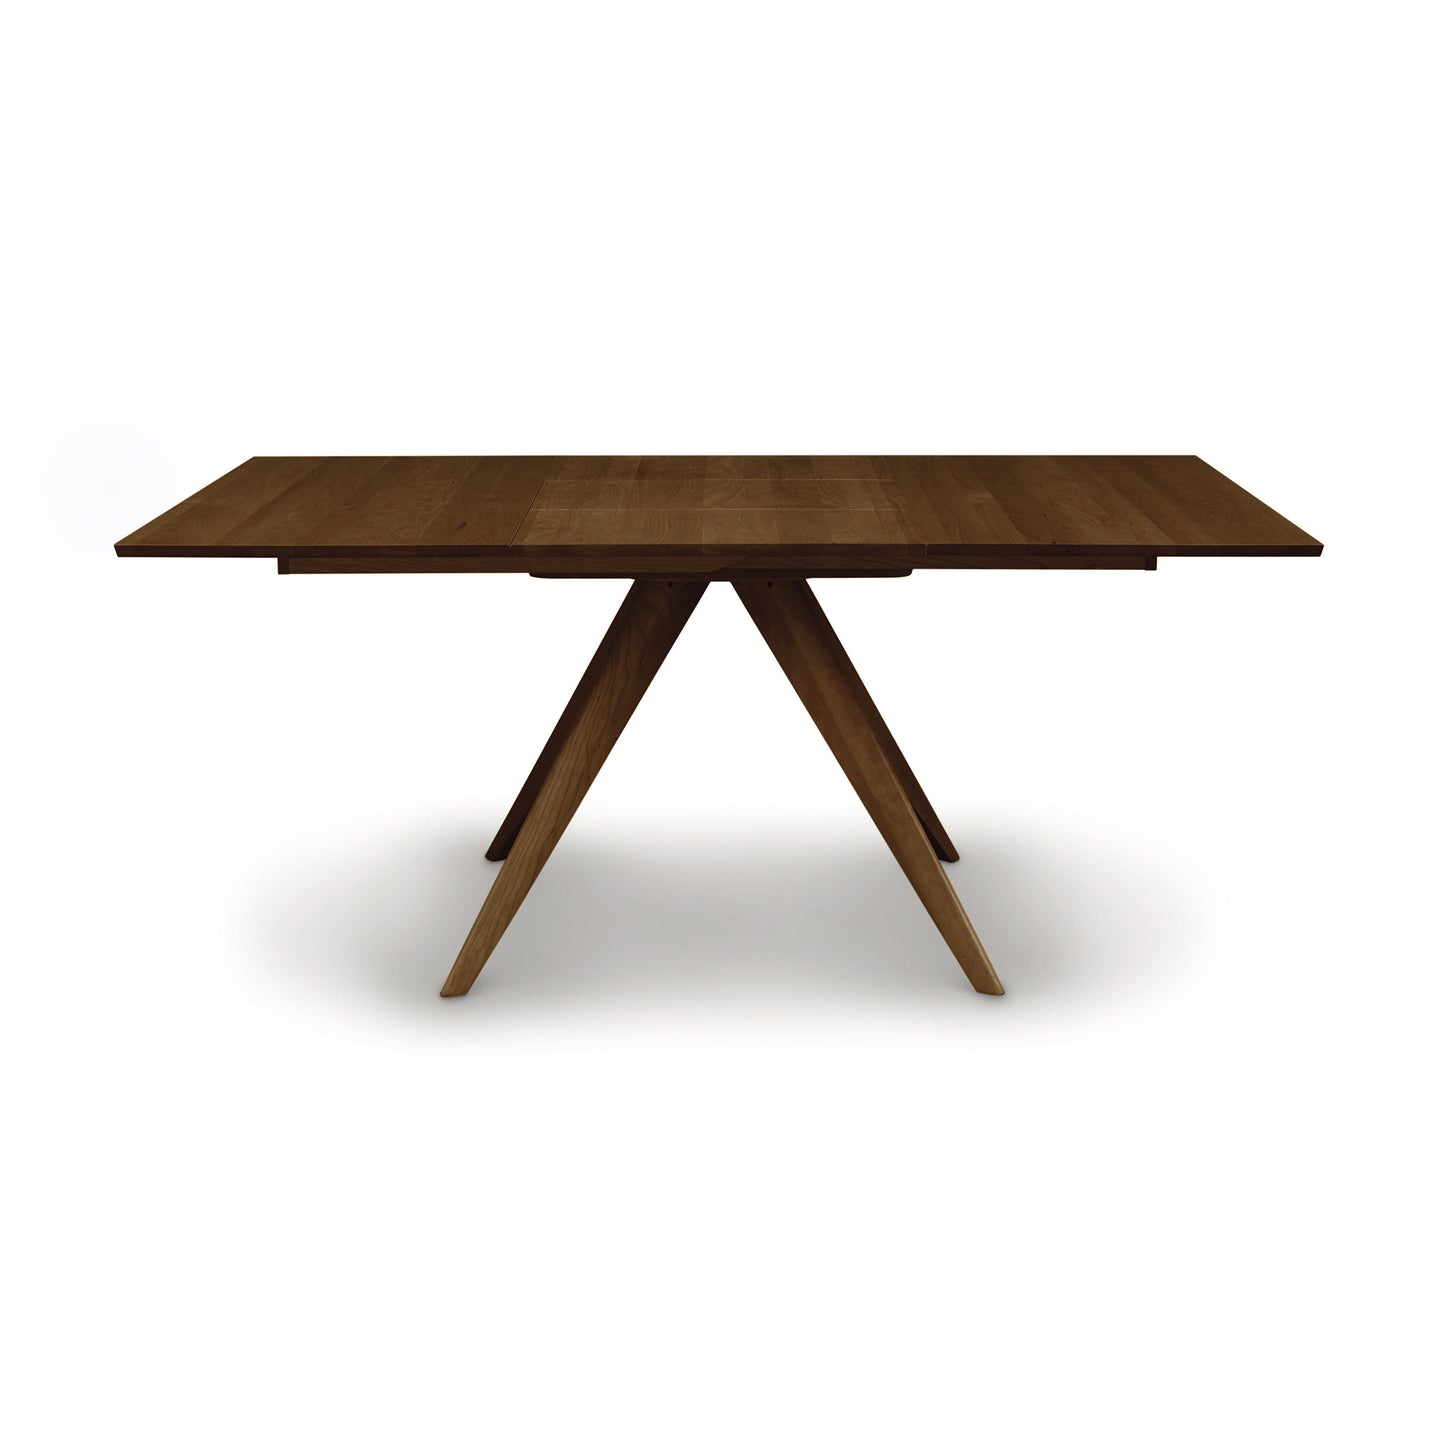 A rectangular dining table with three legs and a wooden top.